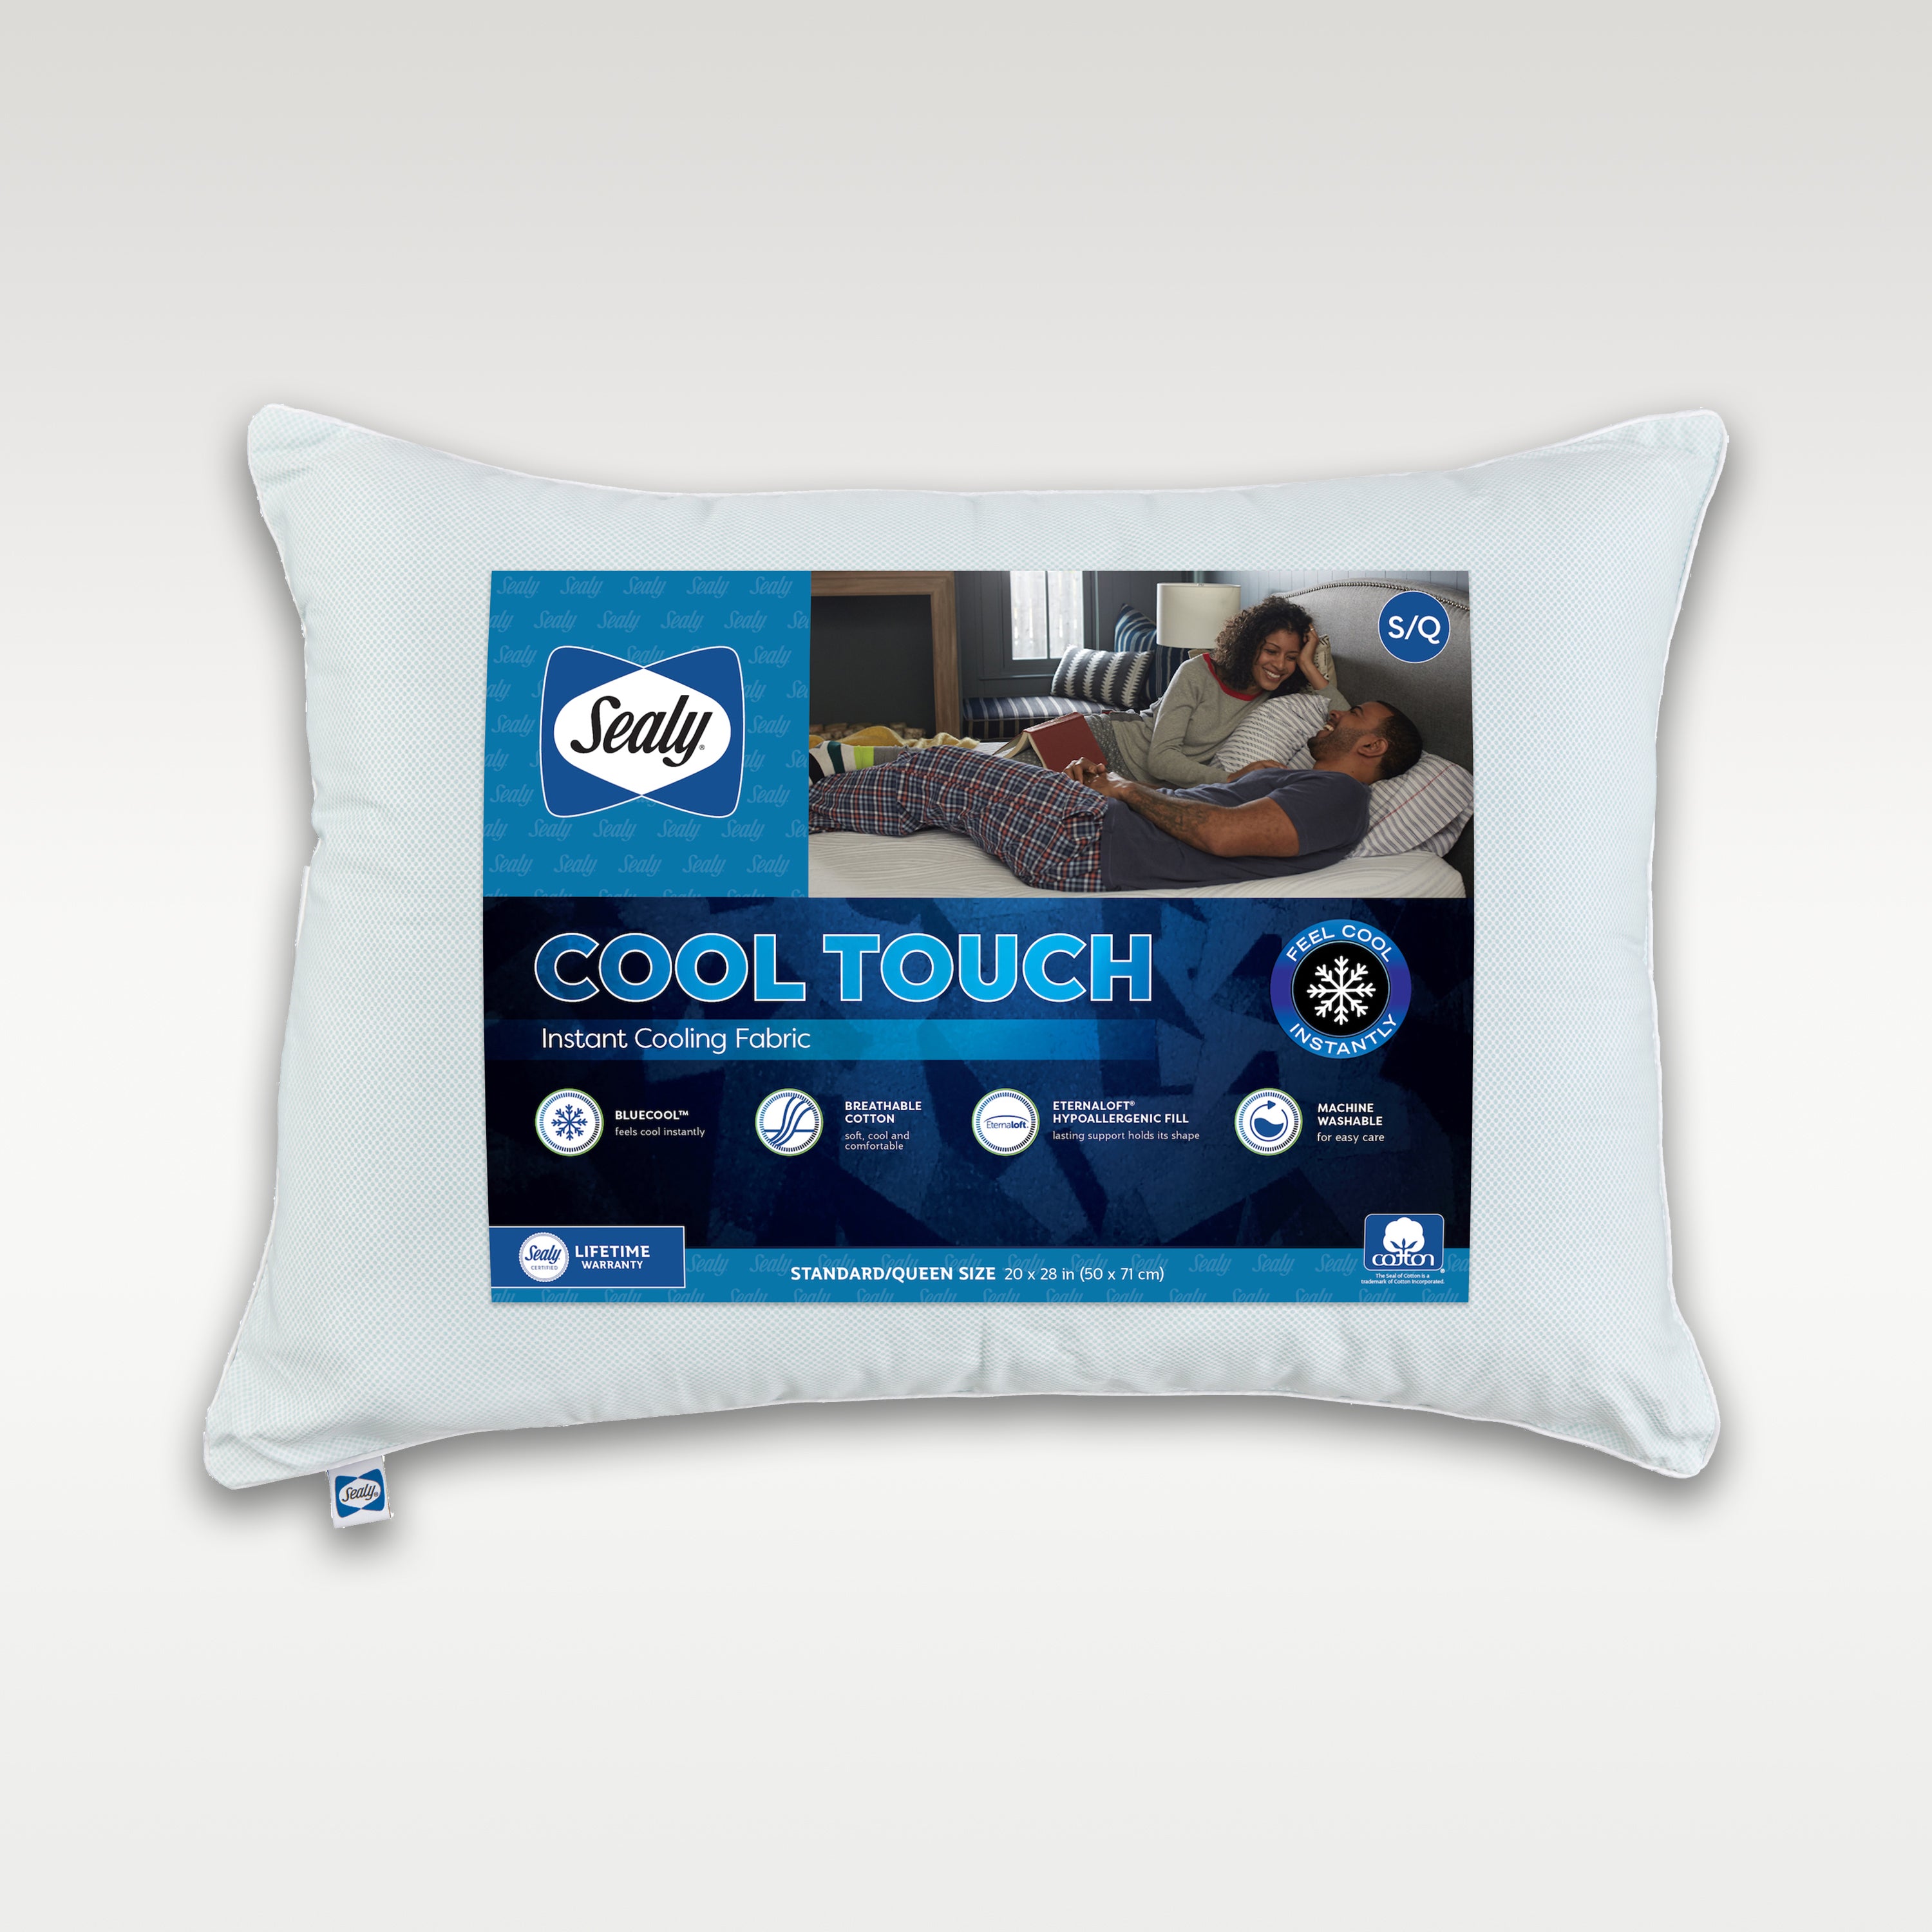 Cool Touch Pillow